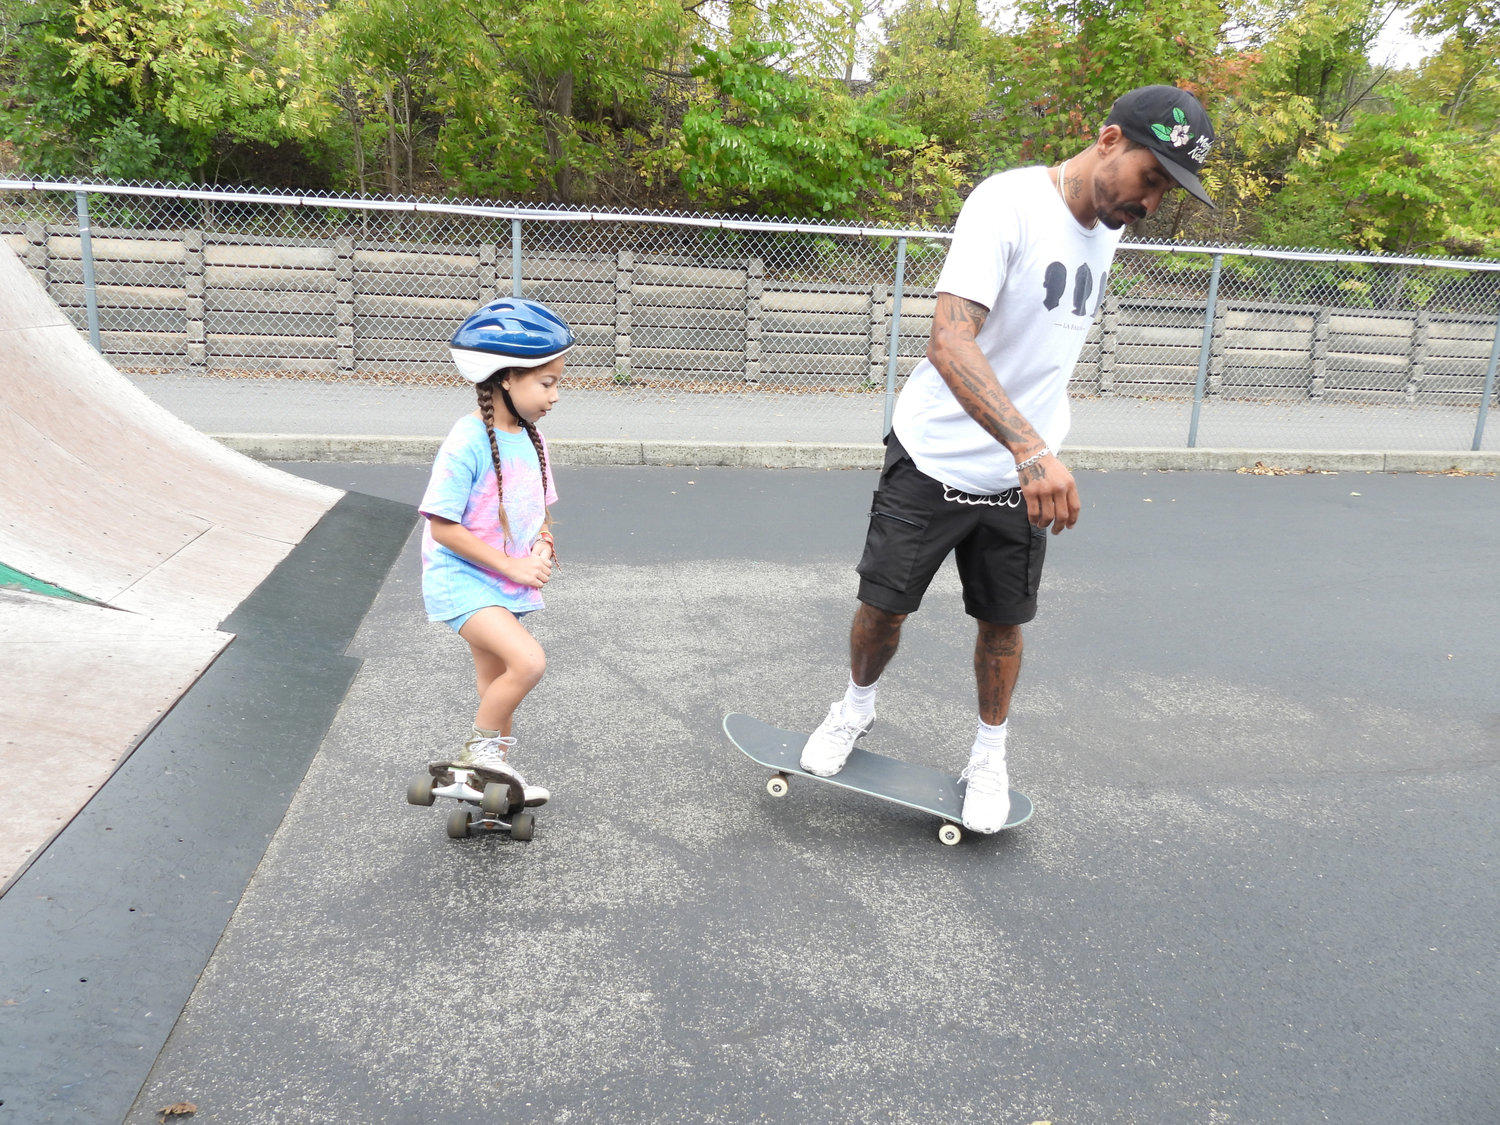 Emanuel "Manny" Santiago teaches a young skater the proper form to turn her board at Lenox Skate Park on Saturday, Sept. 24